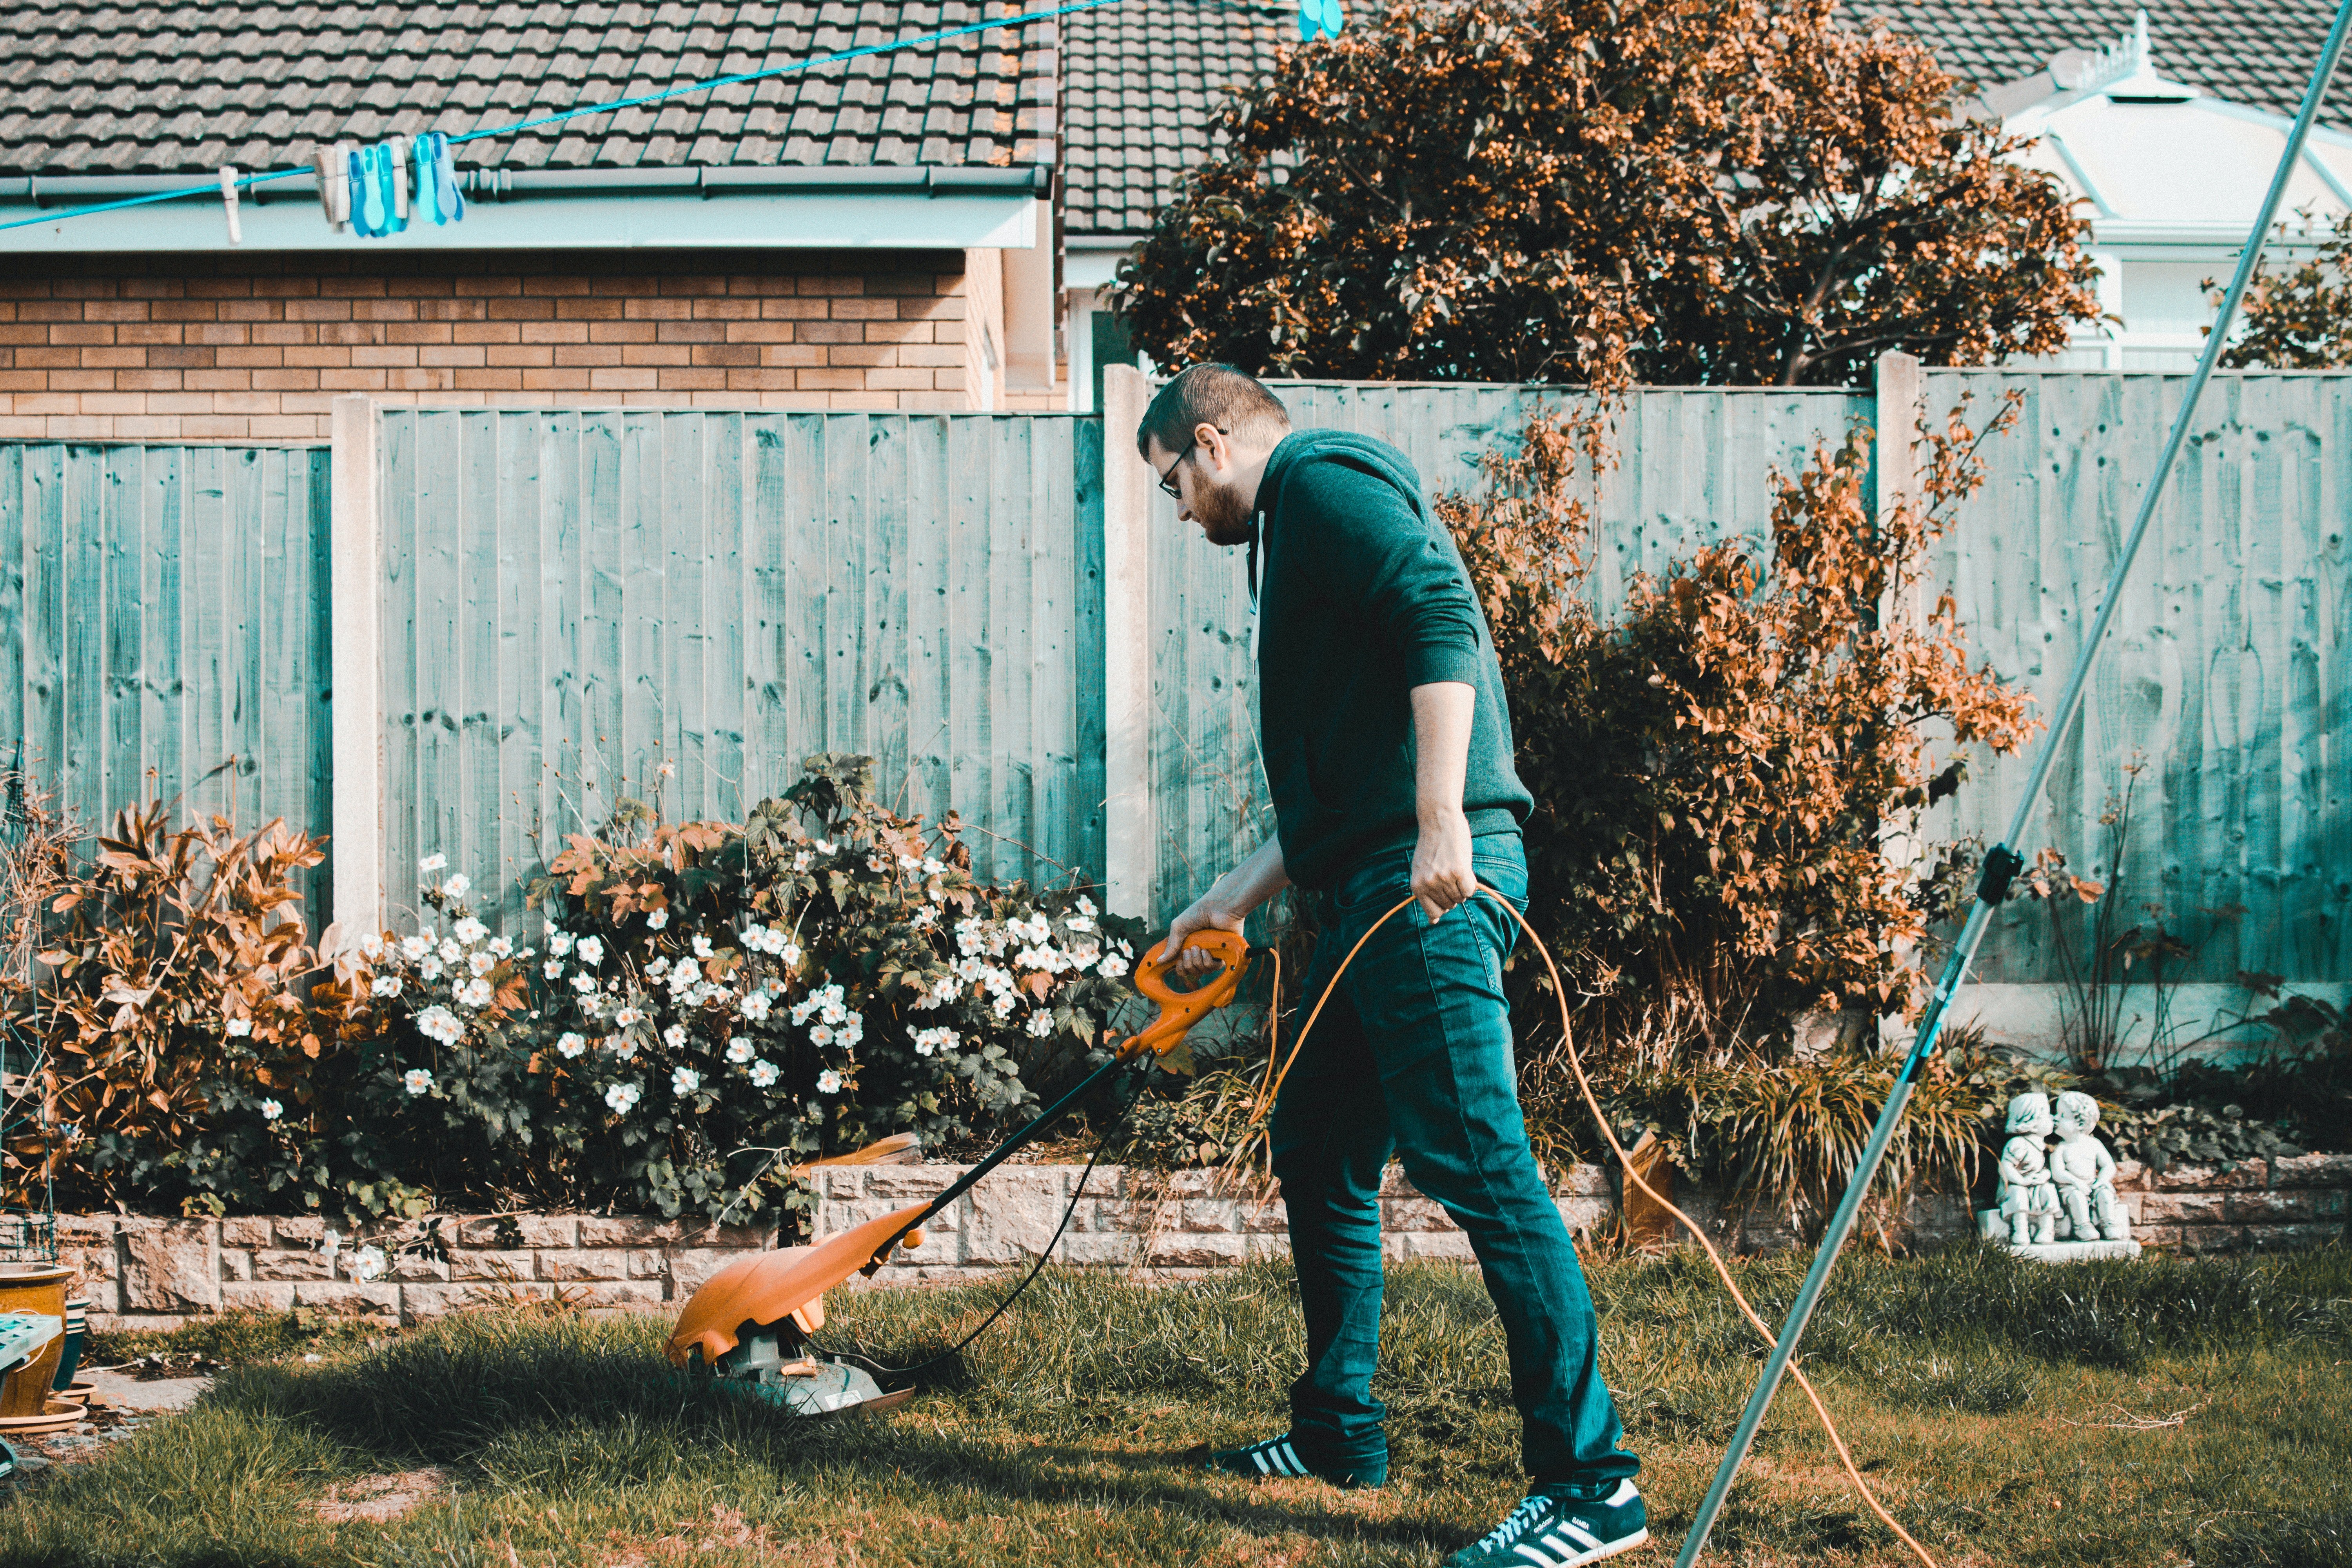 The man tried searching for the rake but couldn't find it. | Photo: Pexels/Lisa